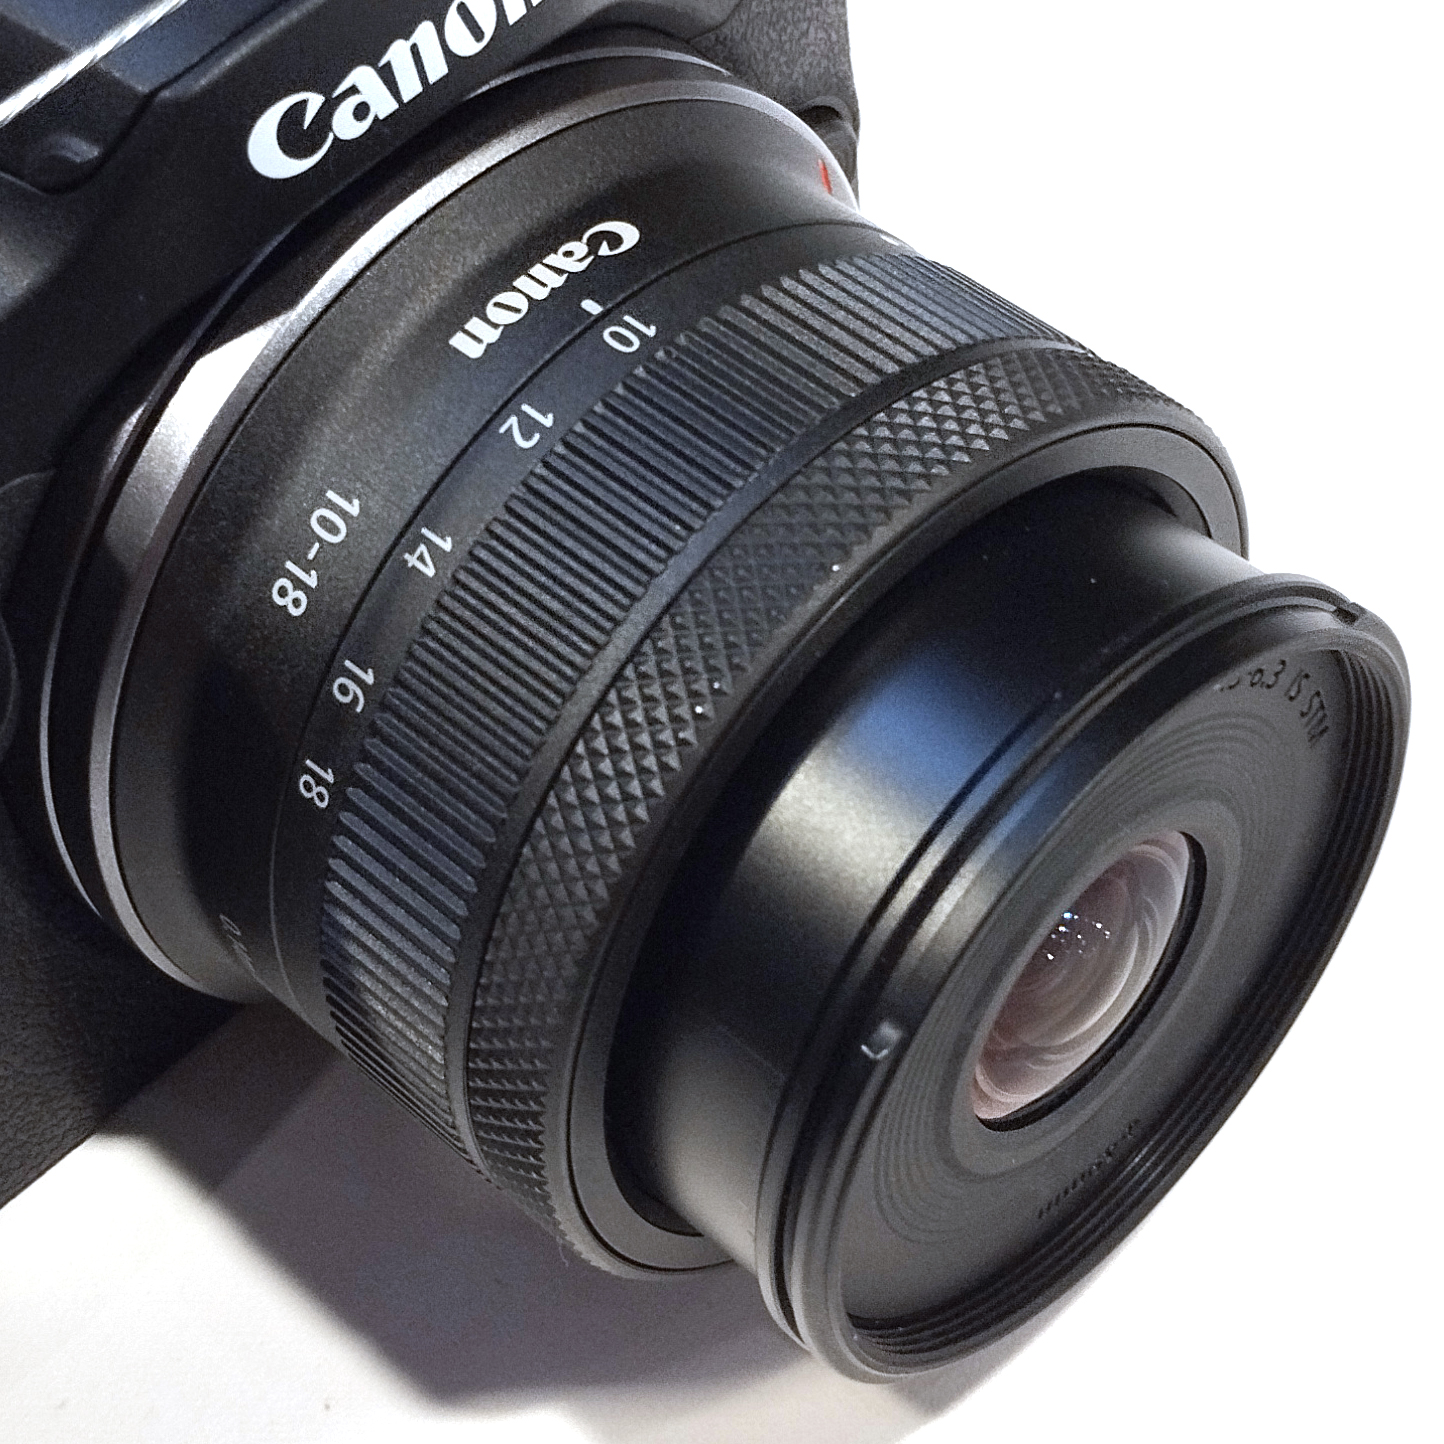 rfs1018l02 - Here is the unannounced Canon RF-S 10-18mm f/4.5-6.3 IS STM